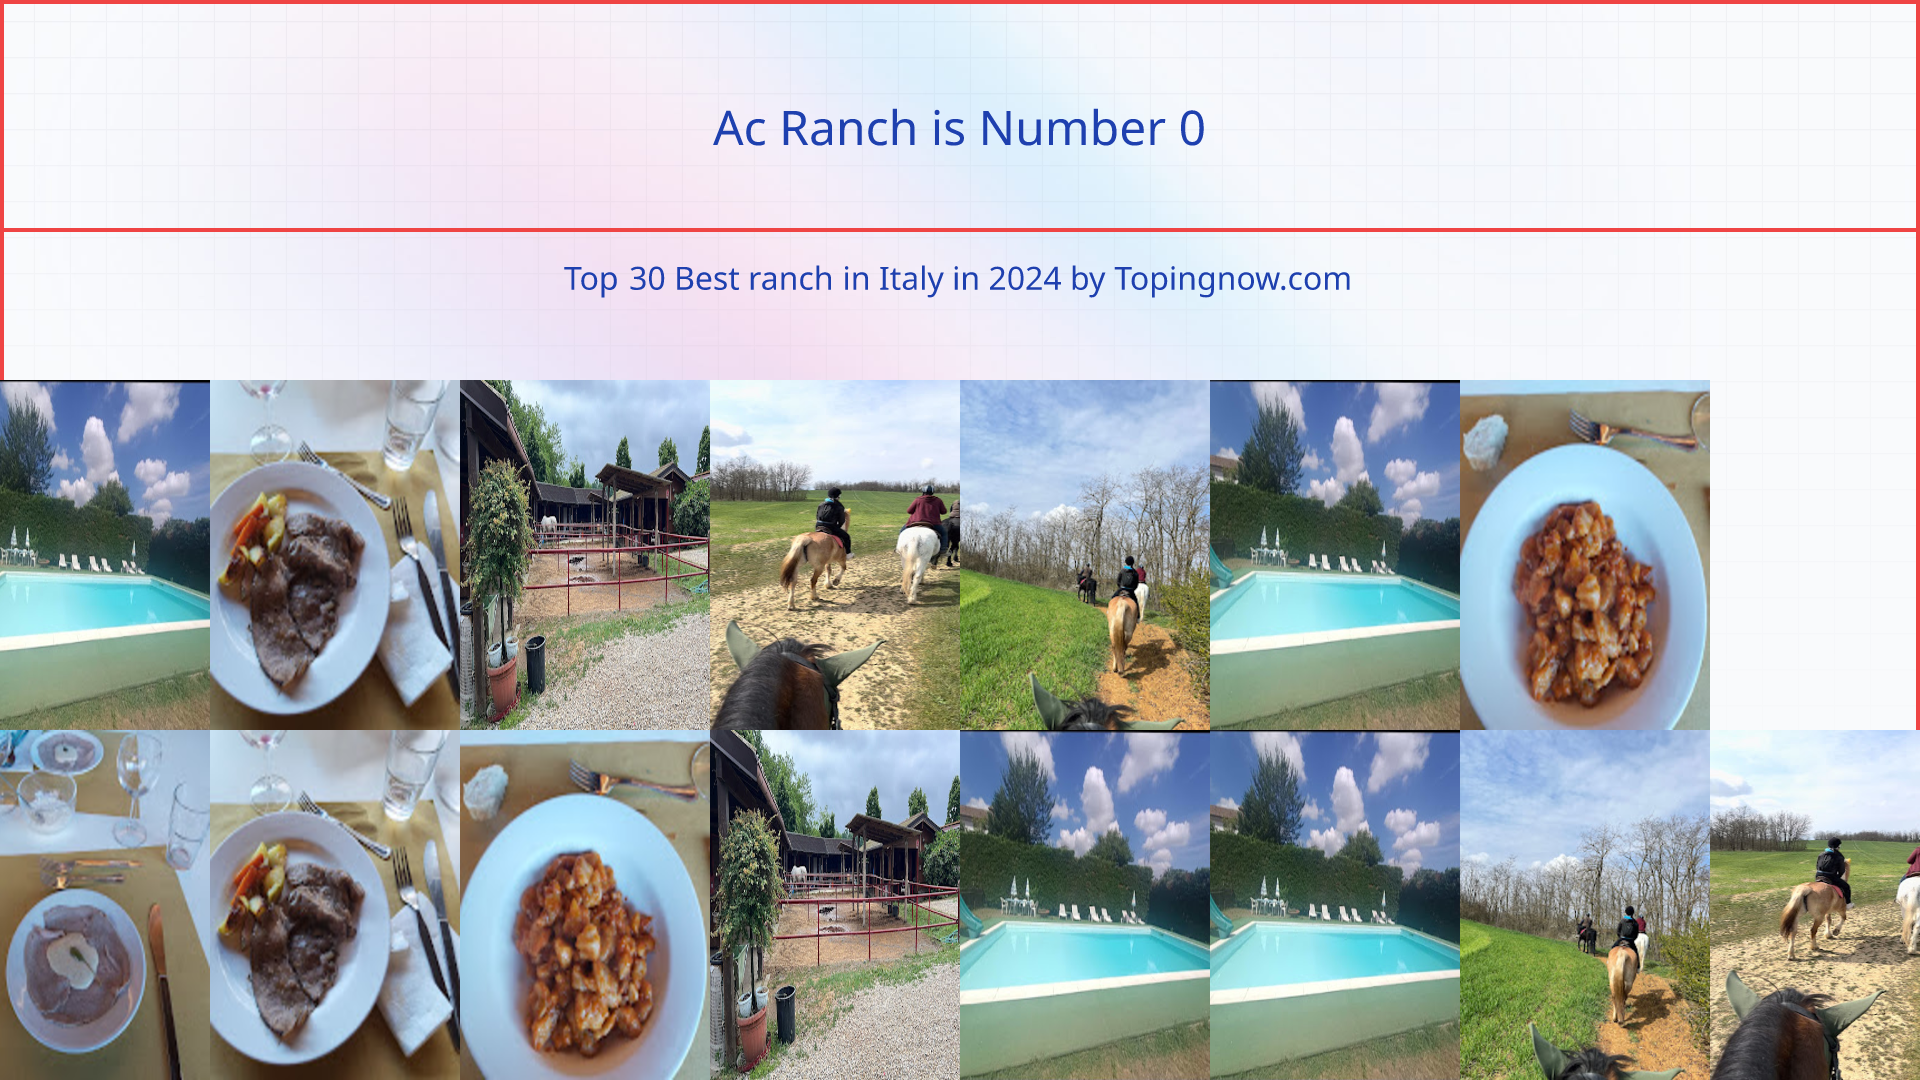 Ac Ranch: Top 30 Best ranch in Italy in 2024